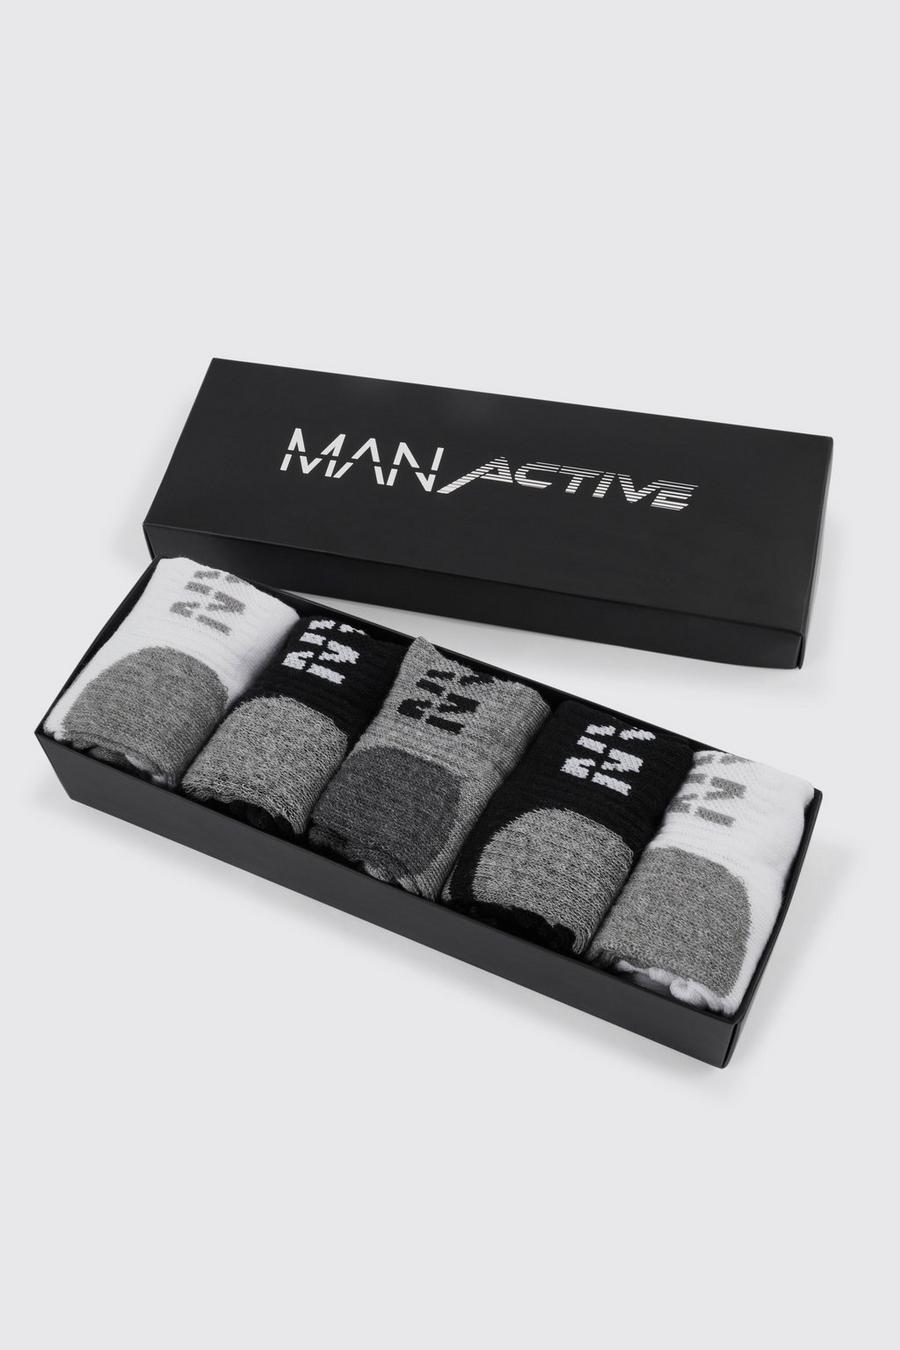 Multi Man Active 5 Pack Gift Boxed Trainer Socks image number 1